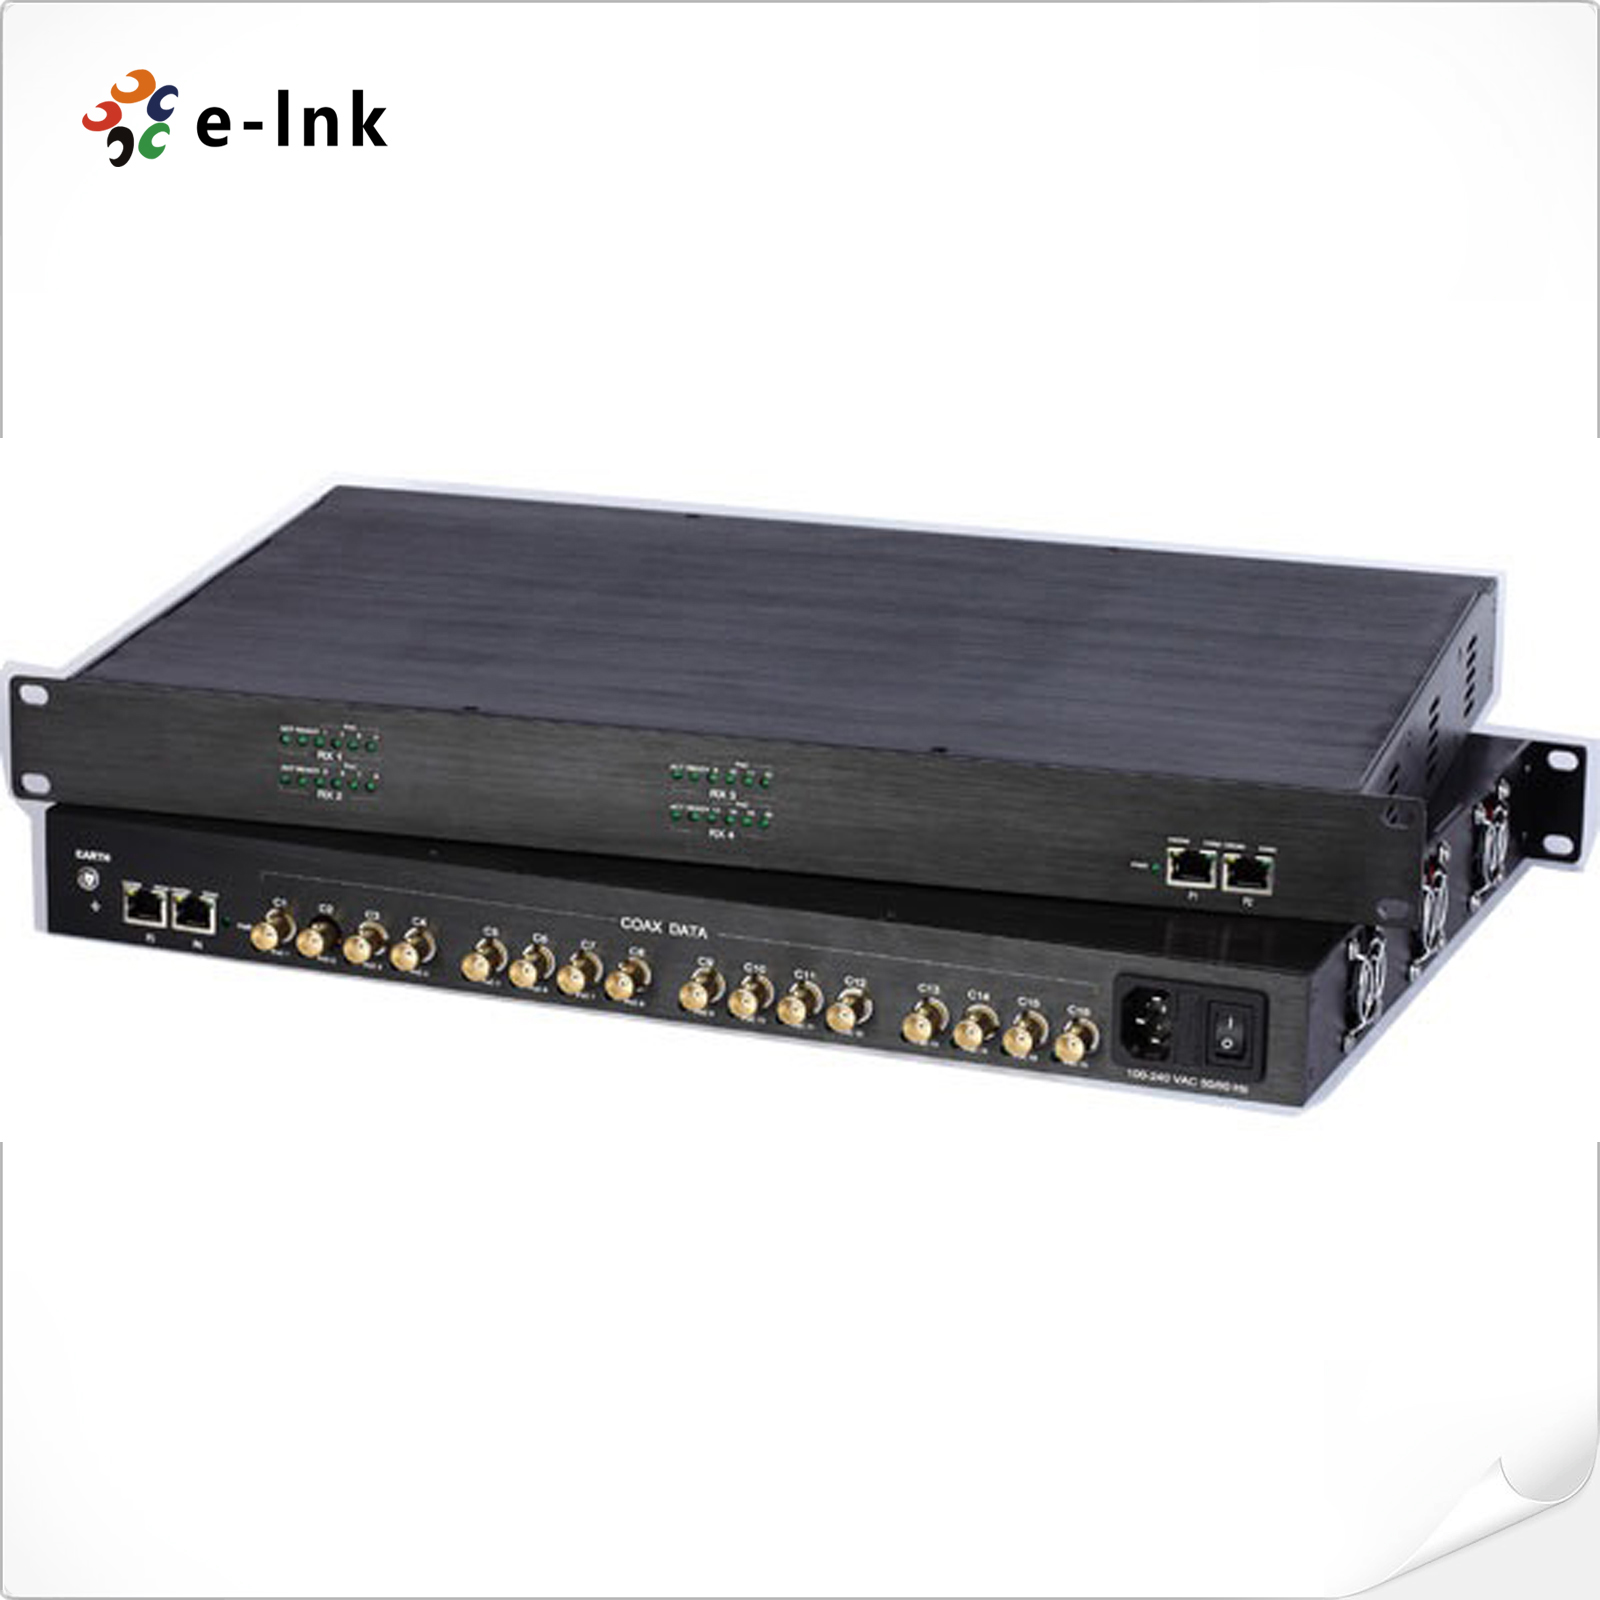 Receiver of 16-port Coax to 4-port 10/100/1000Base-TX Ethernet over Coax Extender with PoC